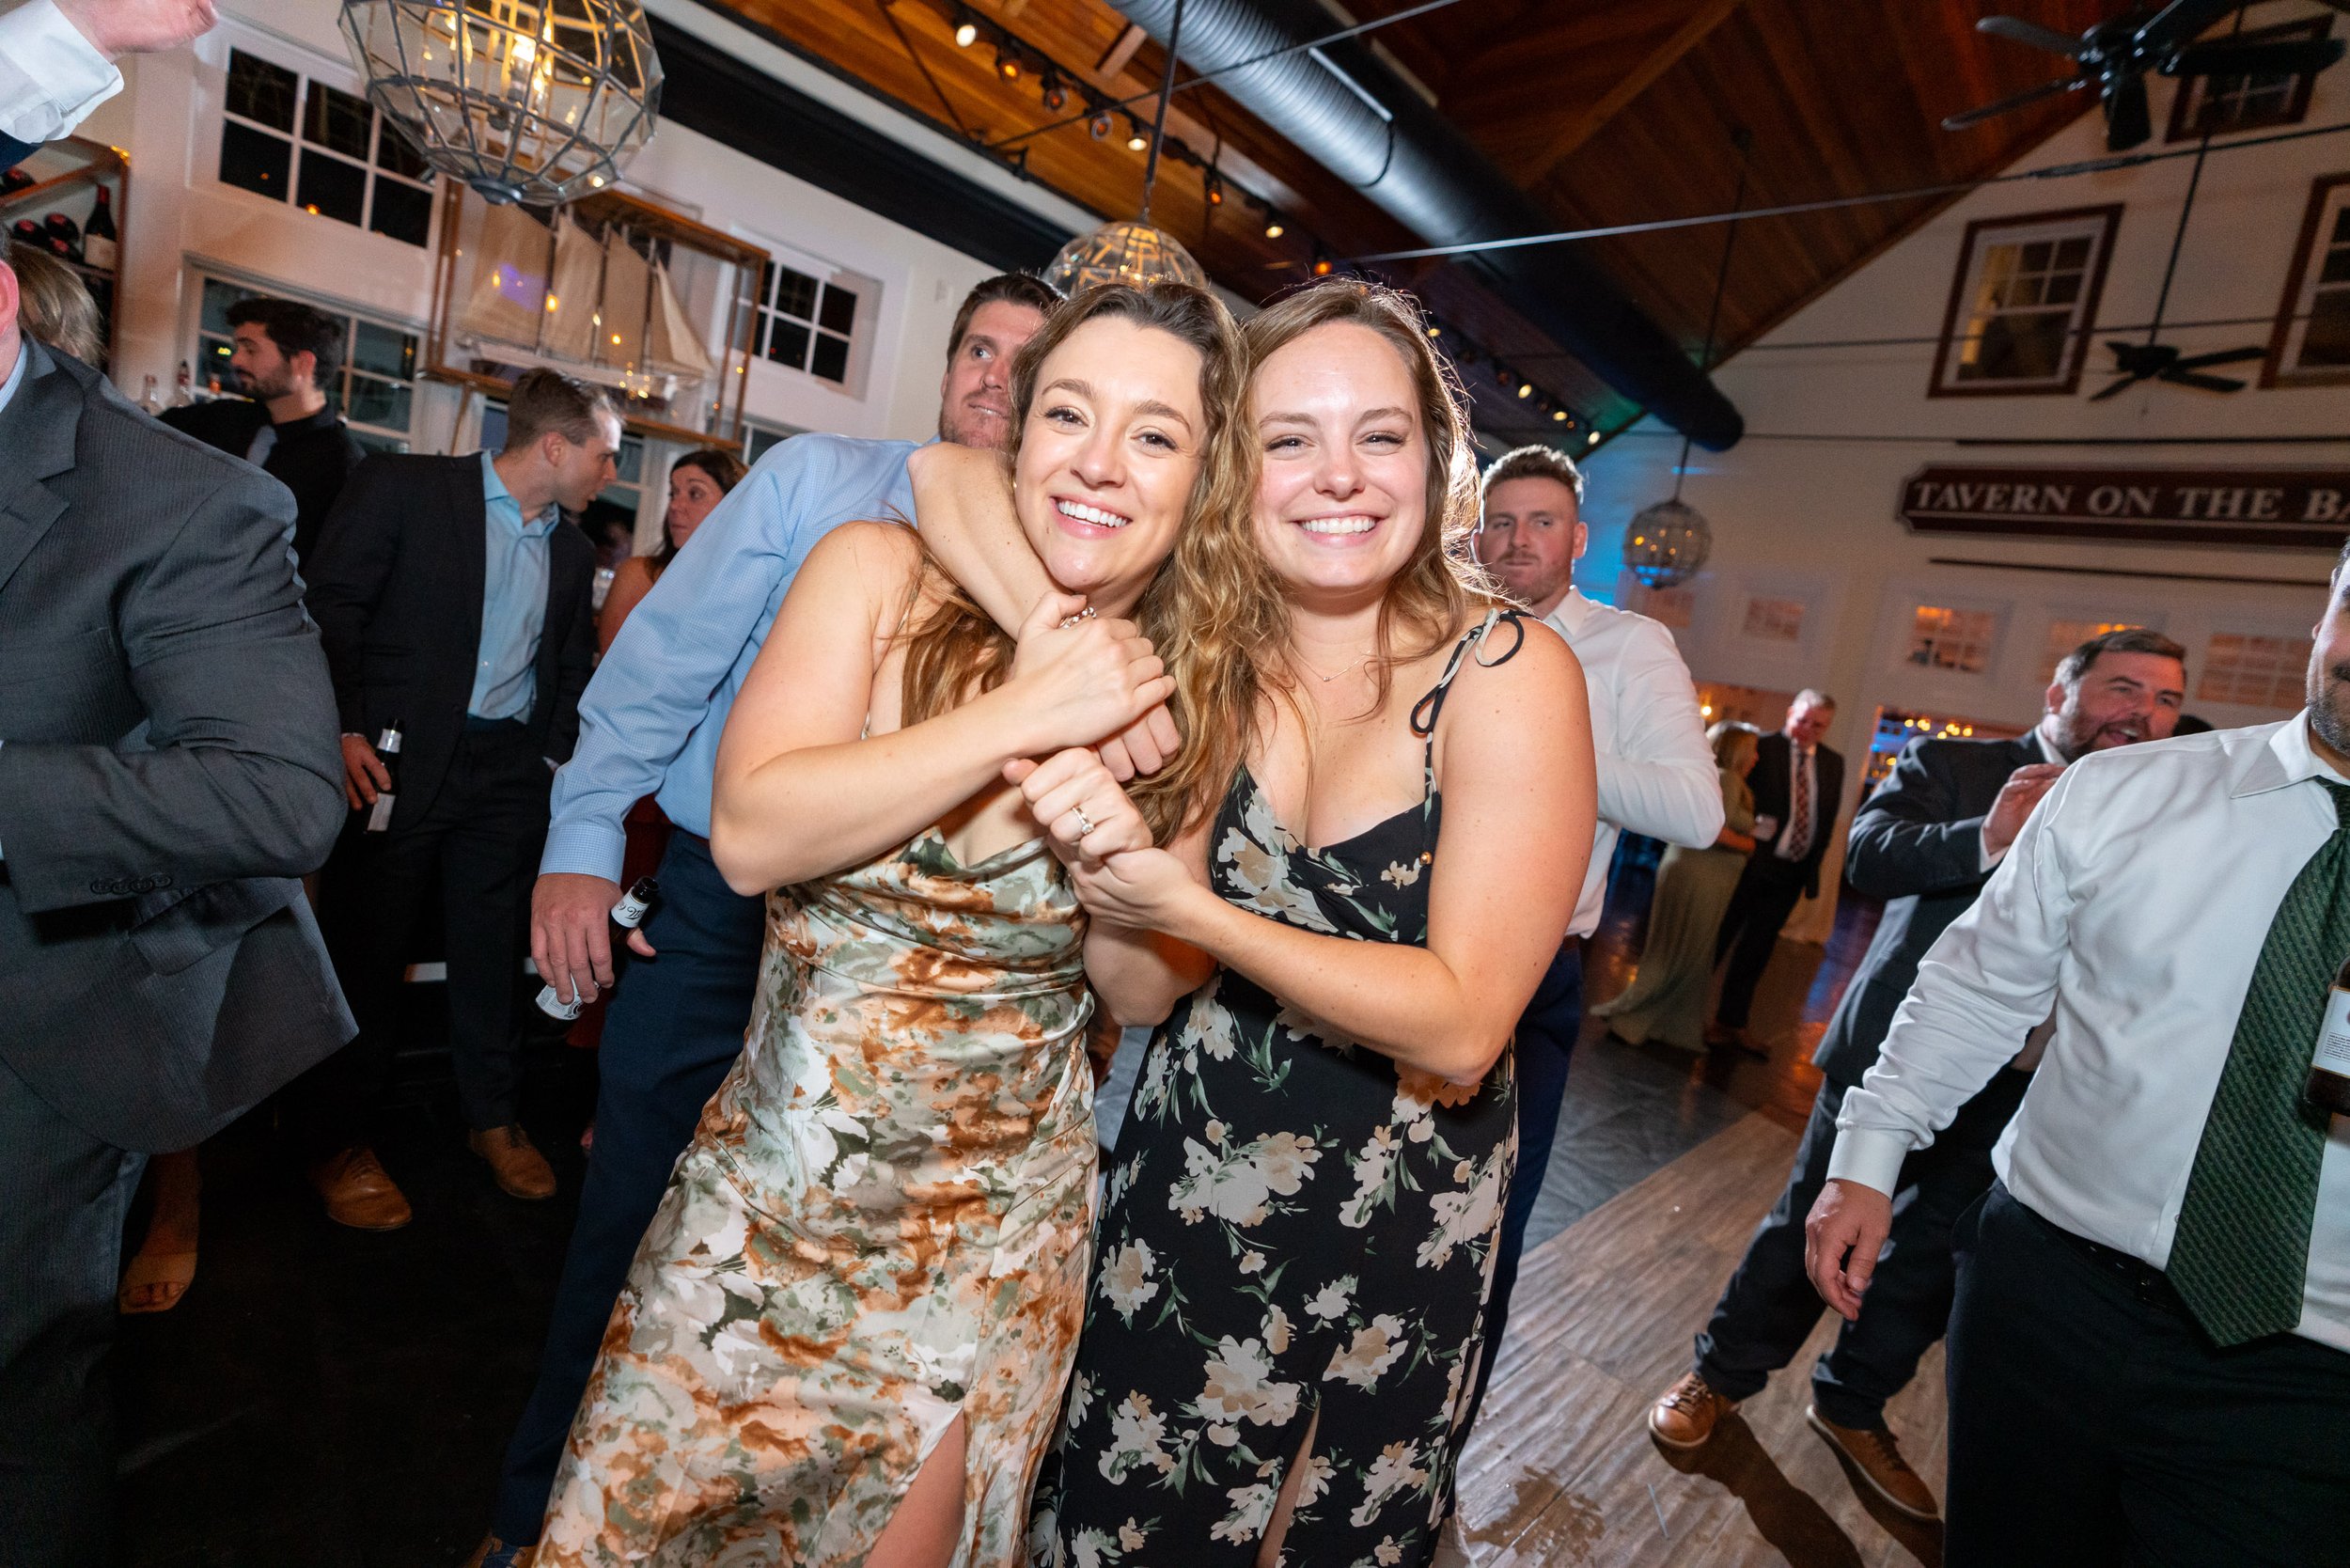 amazing dance floor photos with wedding guests at color Chesapeake Bay Beach Club wedding